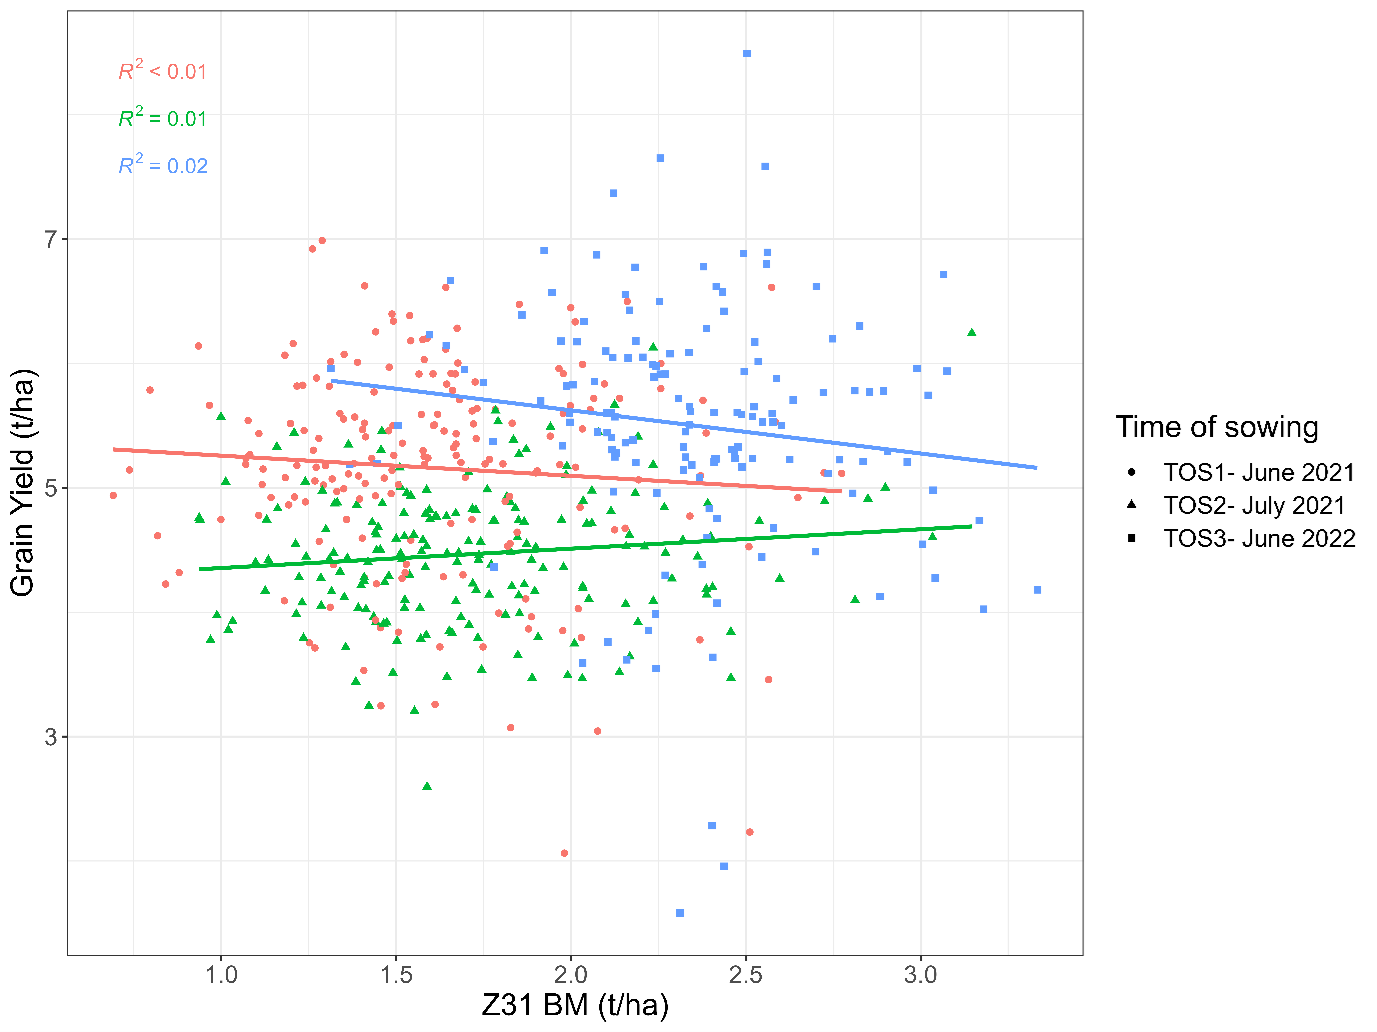 Two years of field experiments using elite high vigour wheat genotypes display no correlation between early (Z31- first node) biomass and final grain yield, regardless of the year or time of sowing. 